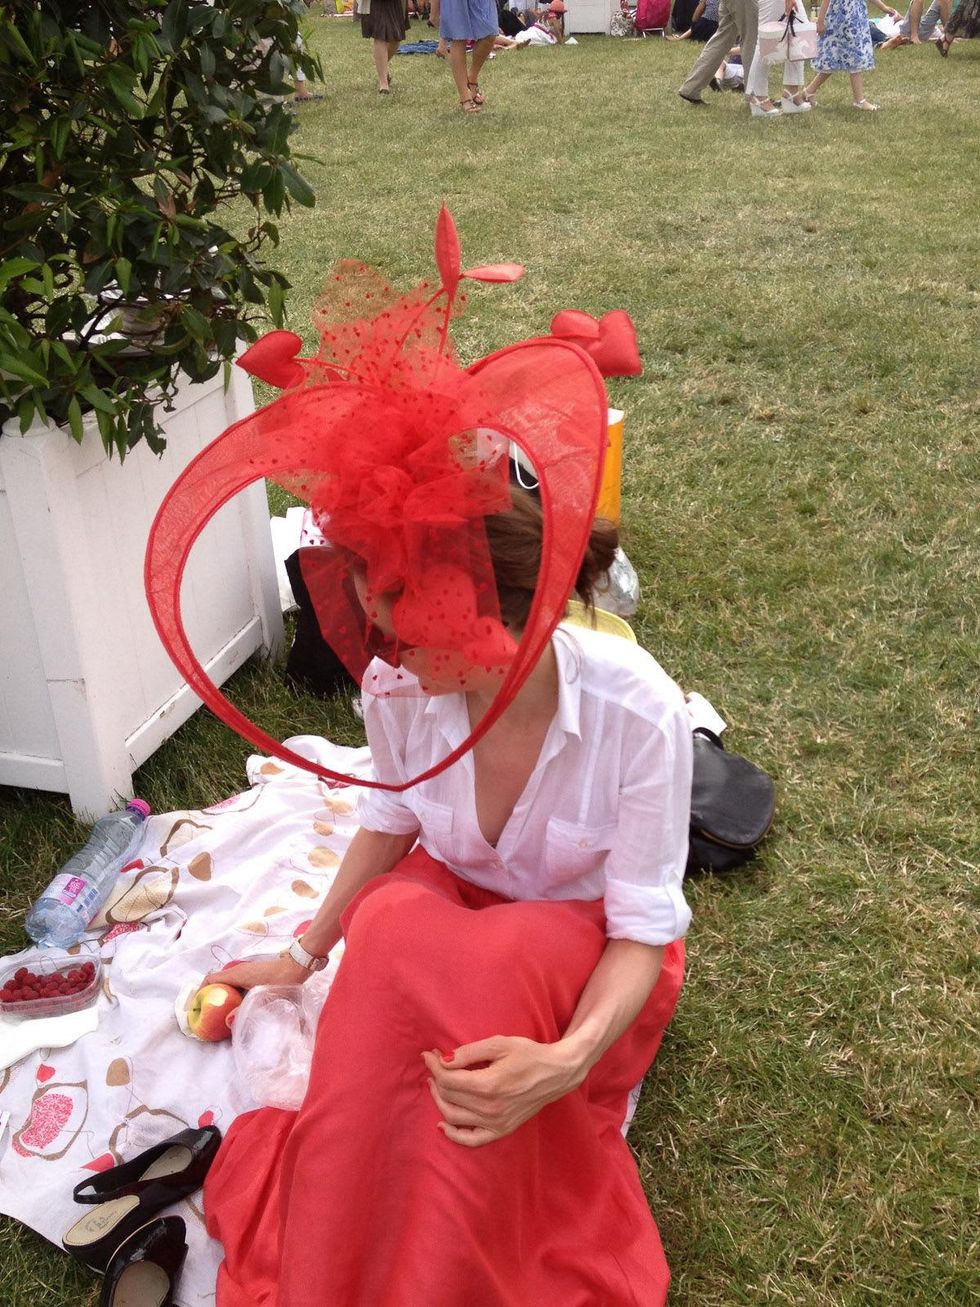 Janine Iannarelli postcards from Paris July 2013 "creation in red" hat photo by Janine Iannarelli at the Prix de Diane